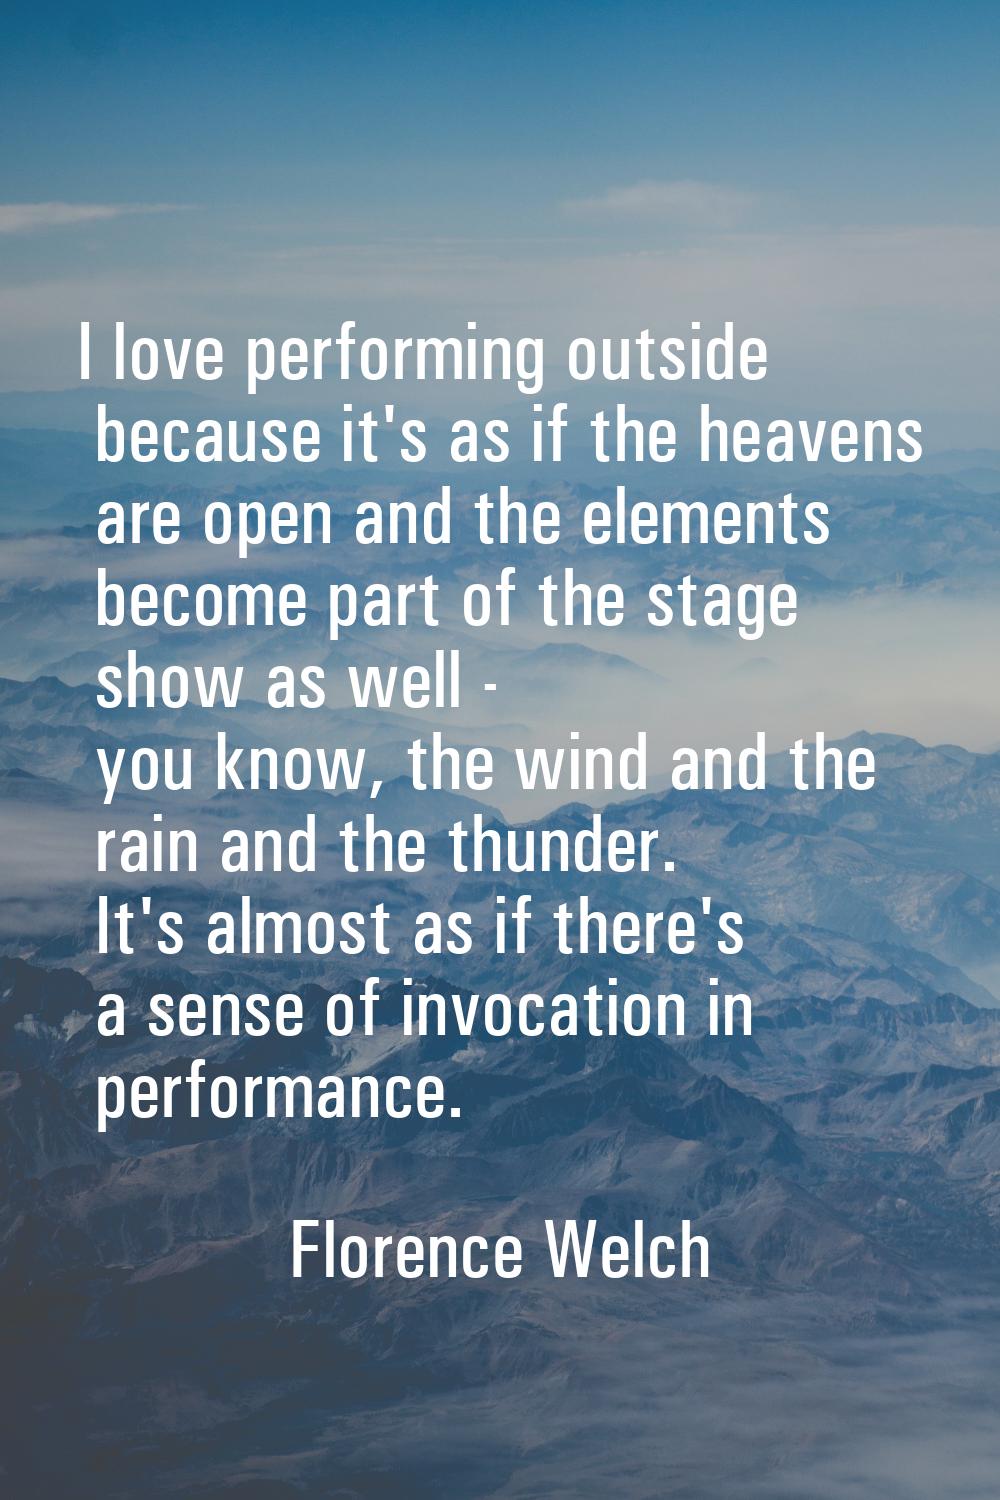 I love performing outside because it's as if the heavens are open and the elements become part of t